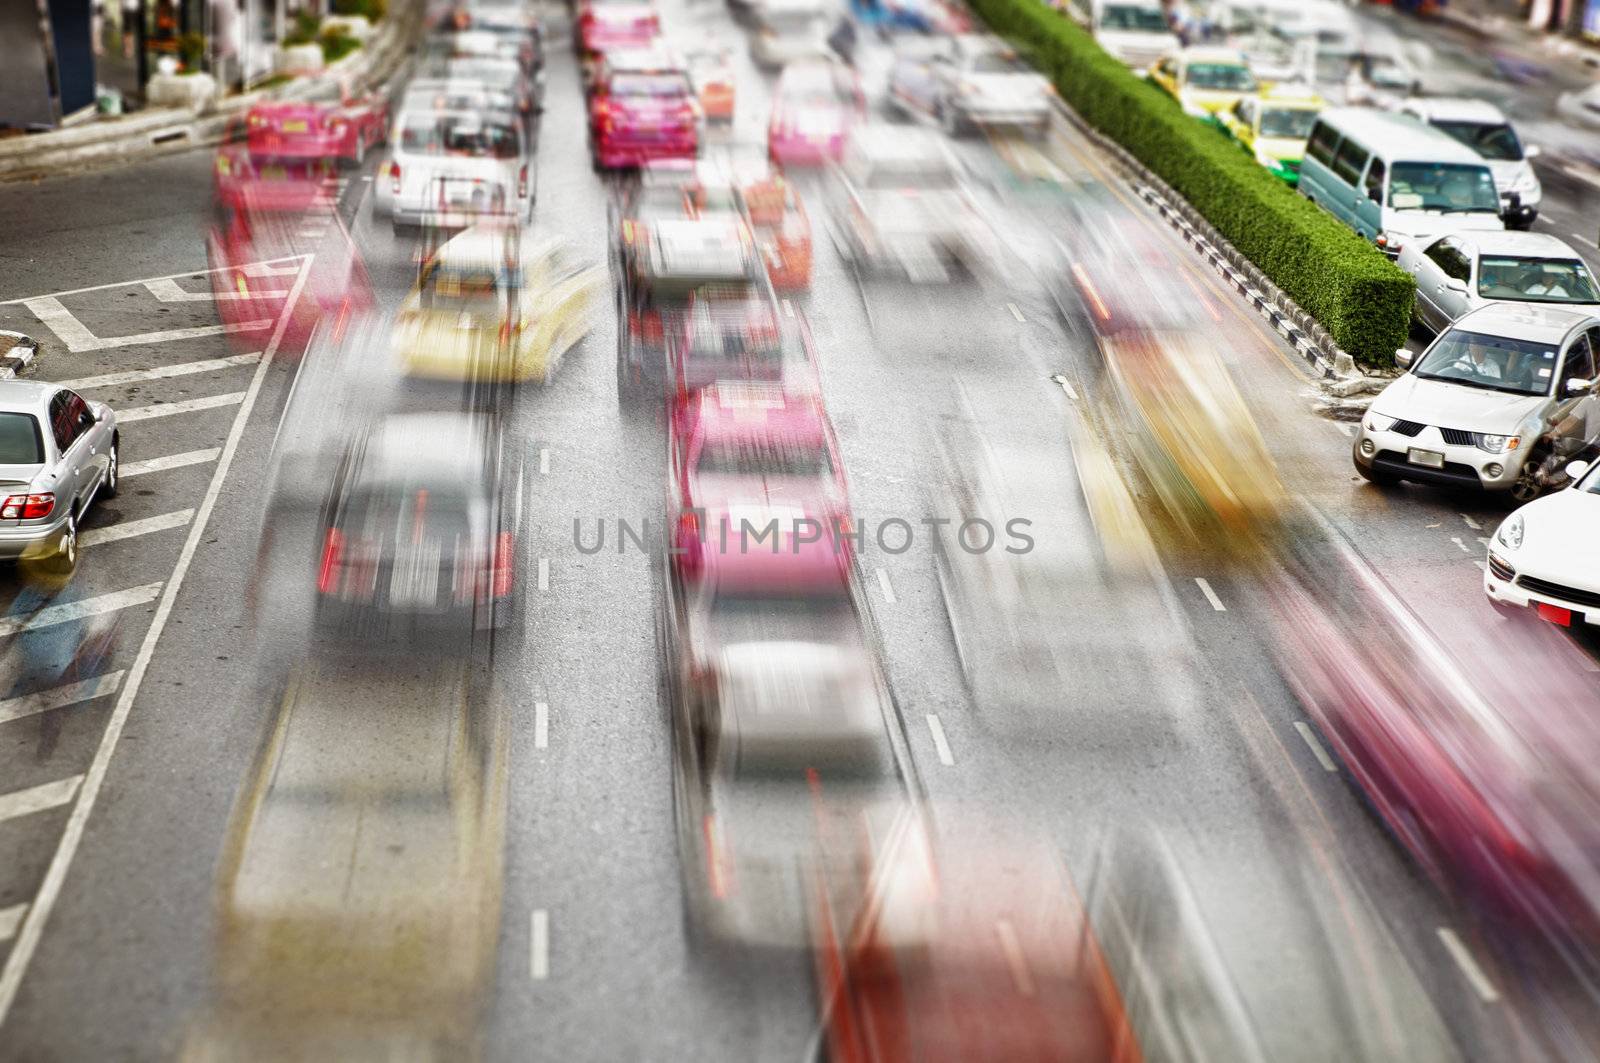 Traffic on the streets. Bangkok by pzaxe